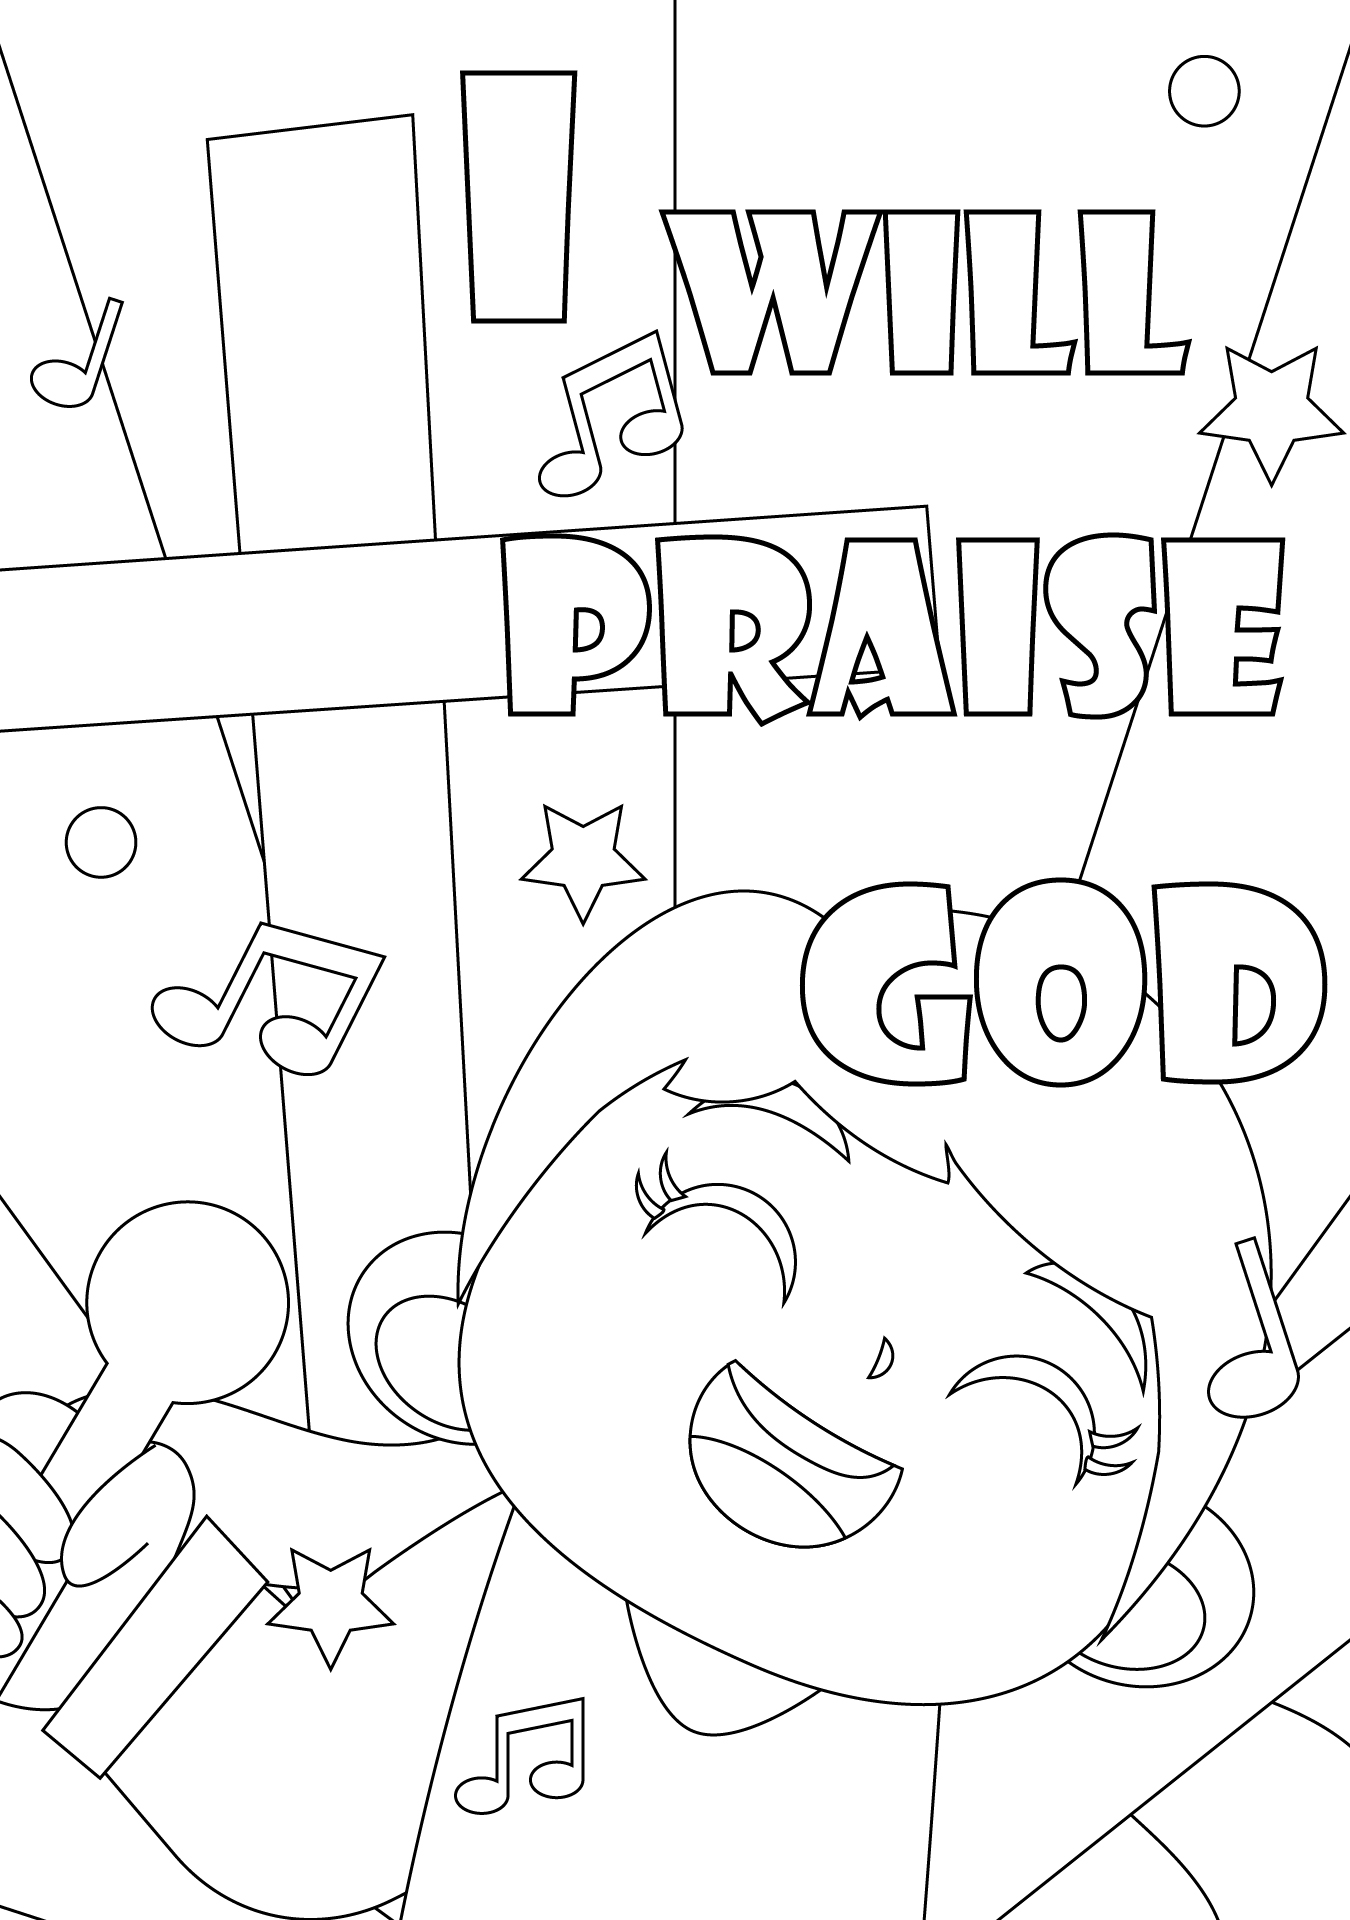 I Will Praise God Coloring Page